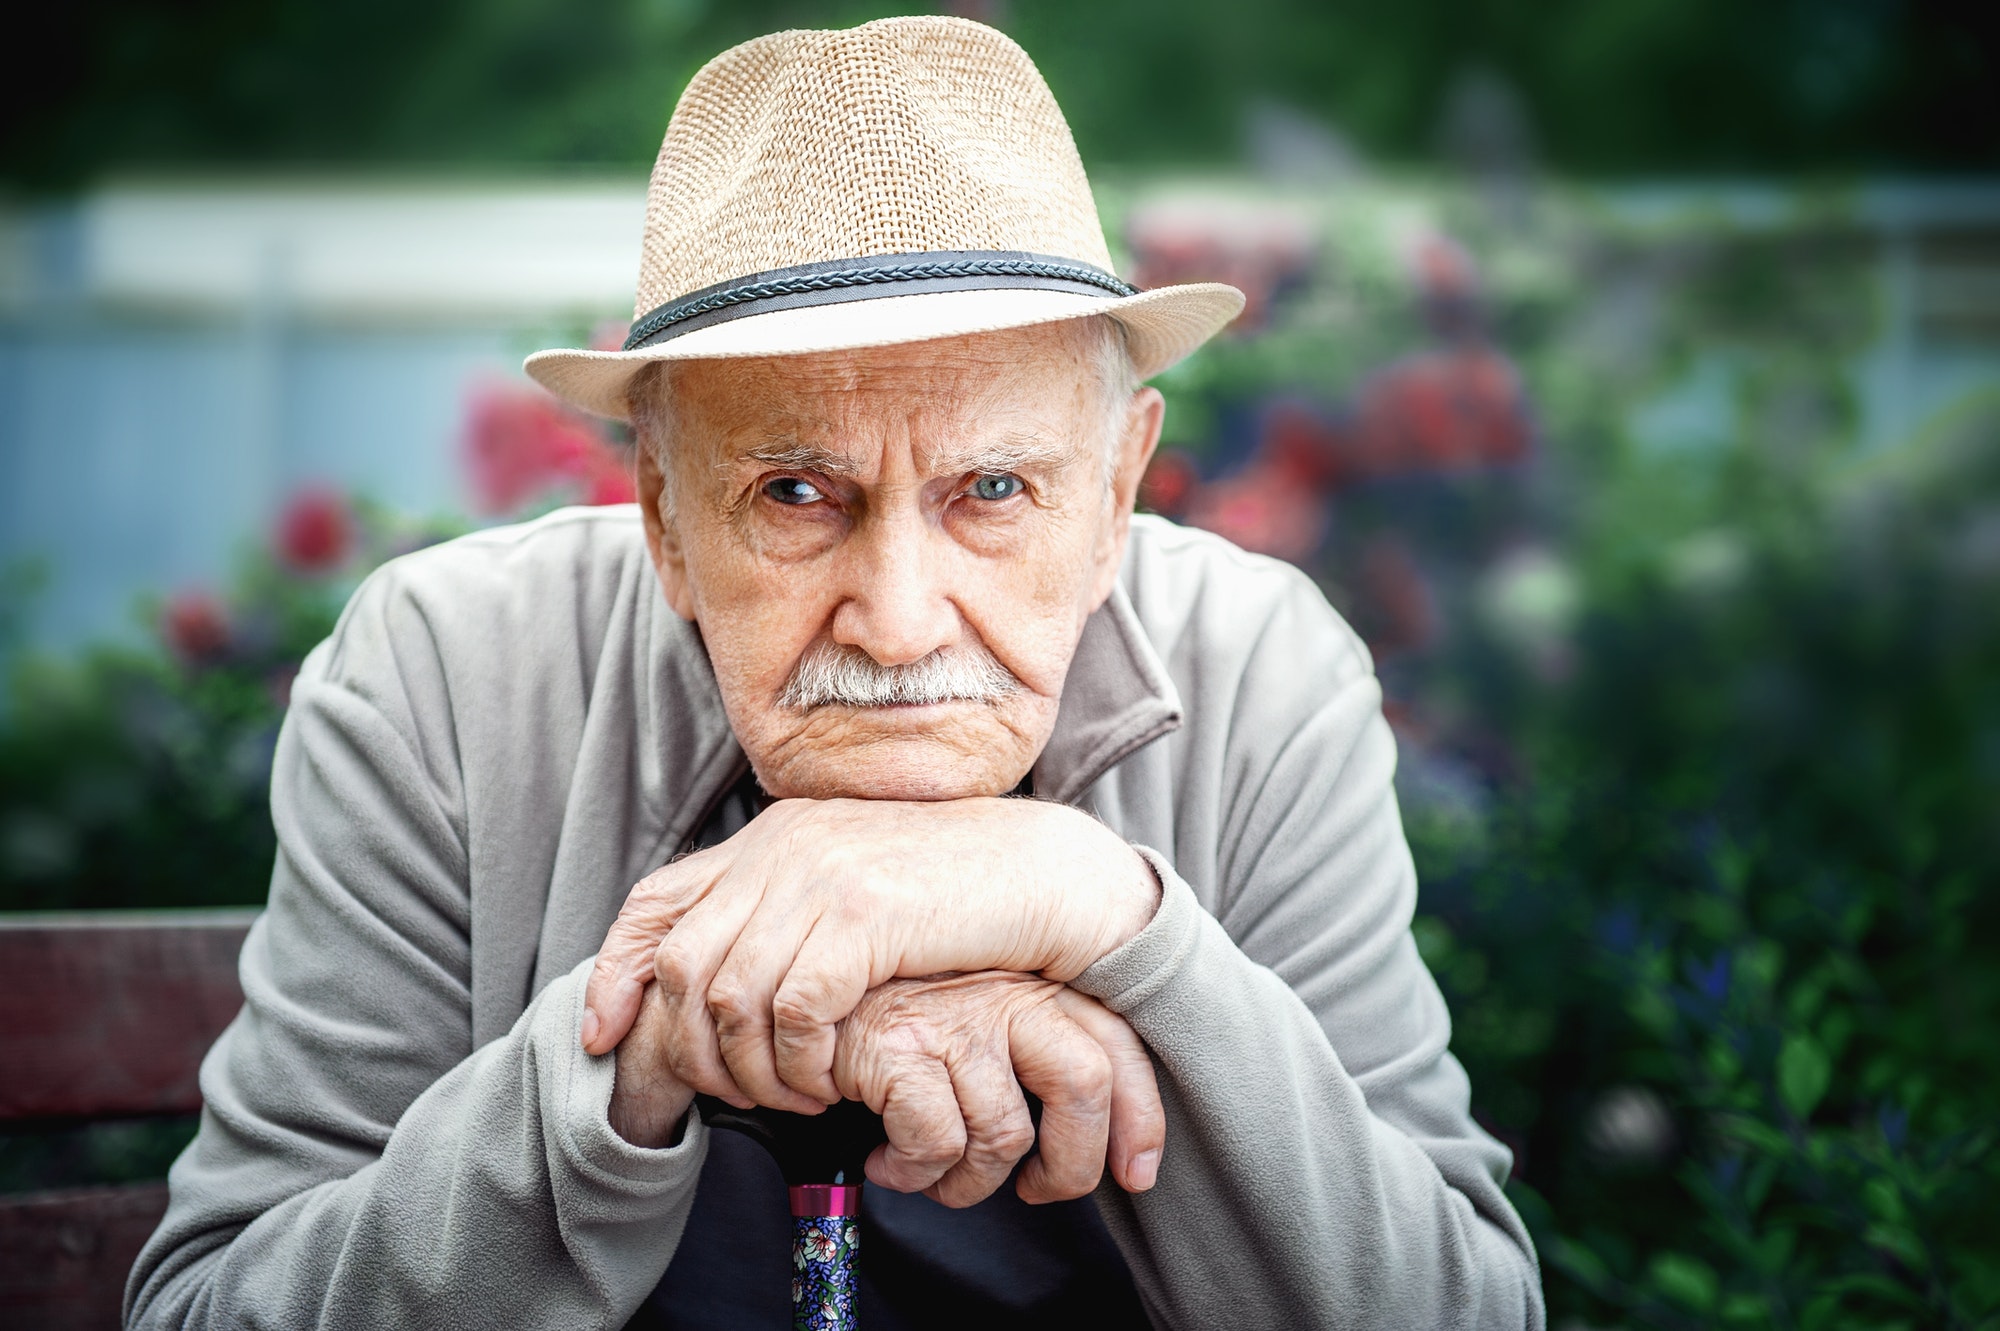 sad, angry old man with a hat is sitting in an open-air garden. concept of loneliness and lonely old